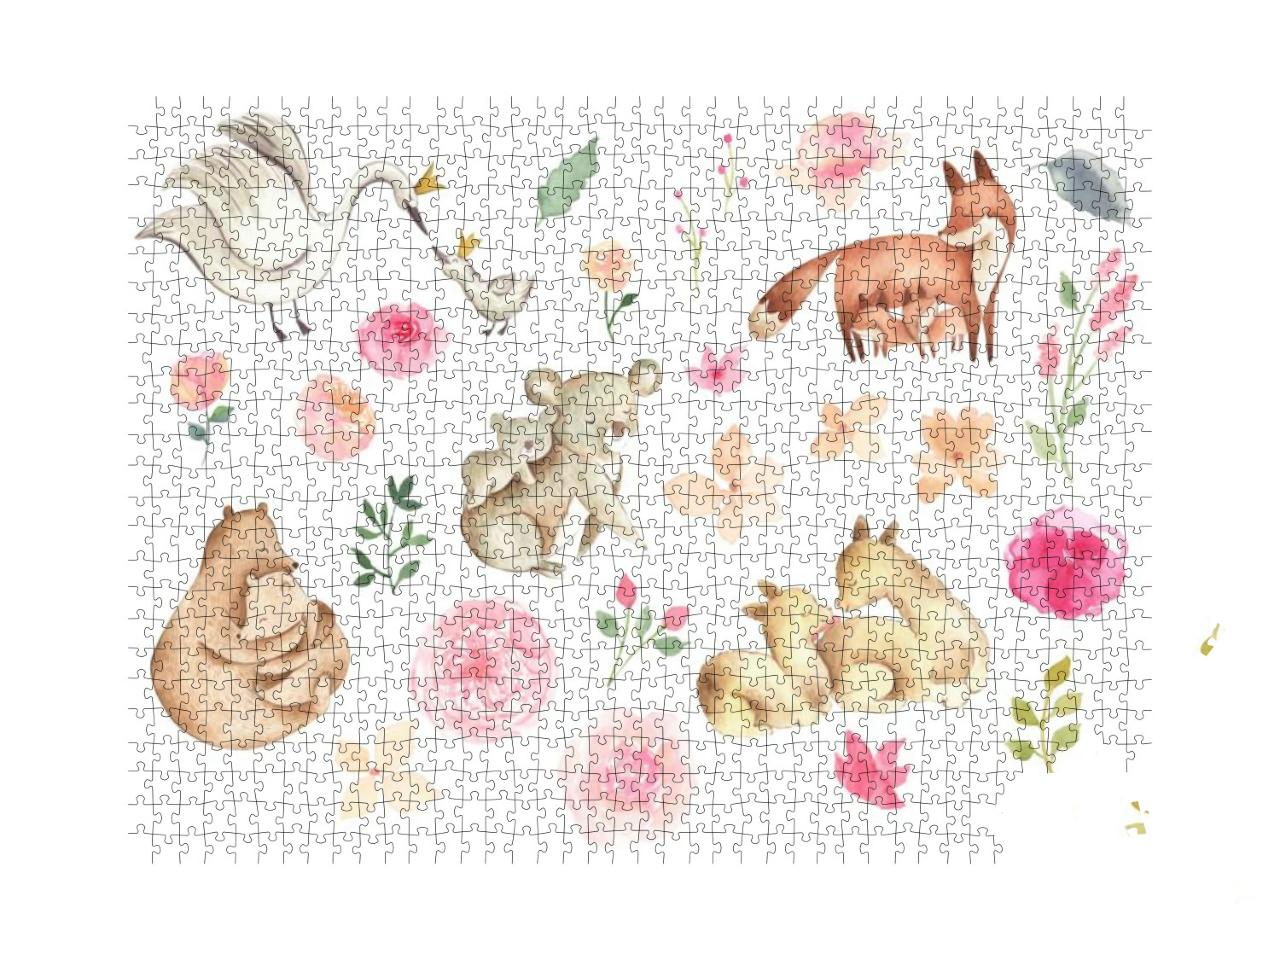 Watercolor Animals Illustration with Mother & Baby... Jigsaw Puzzle with 1000 pieces